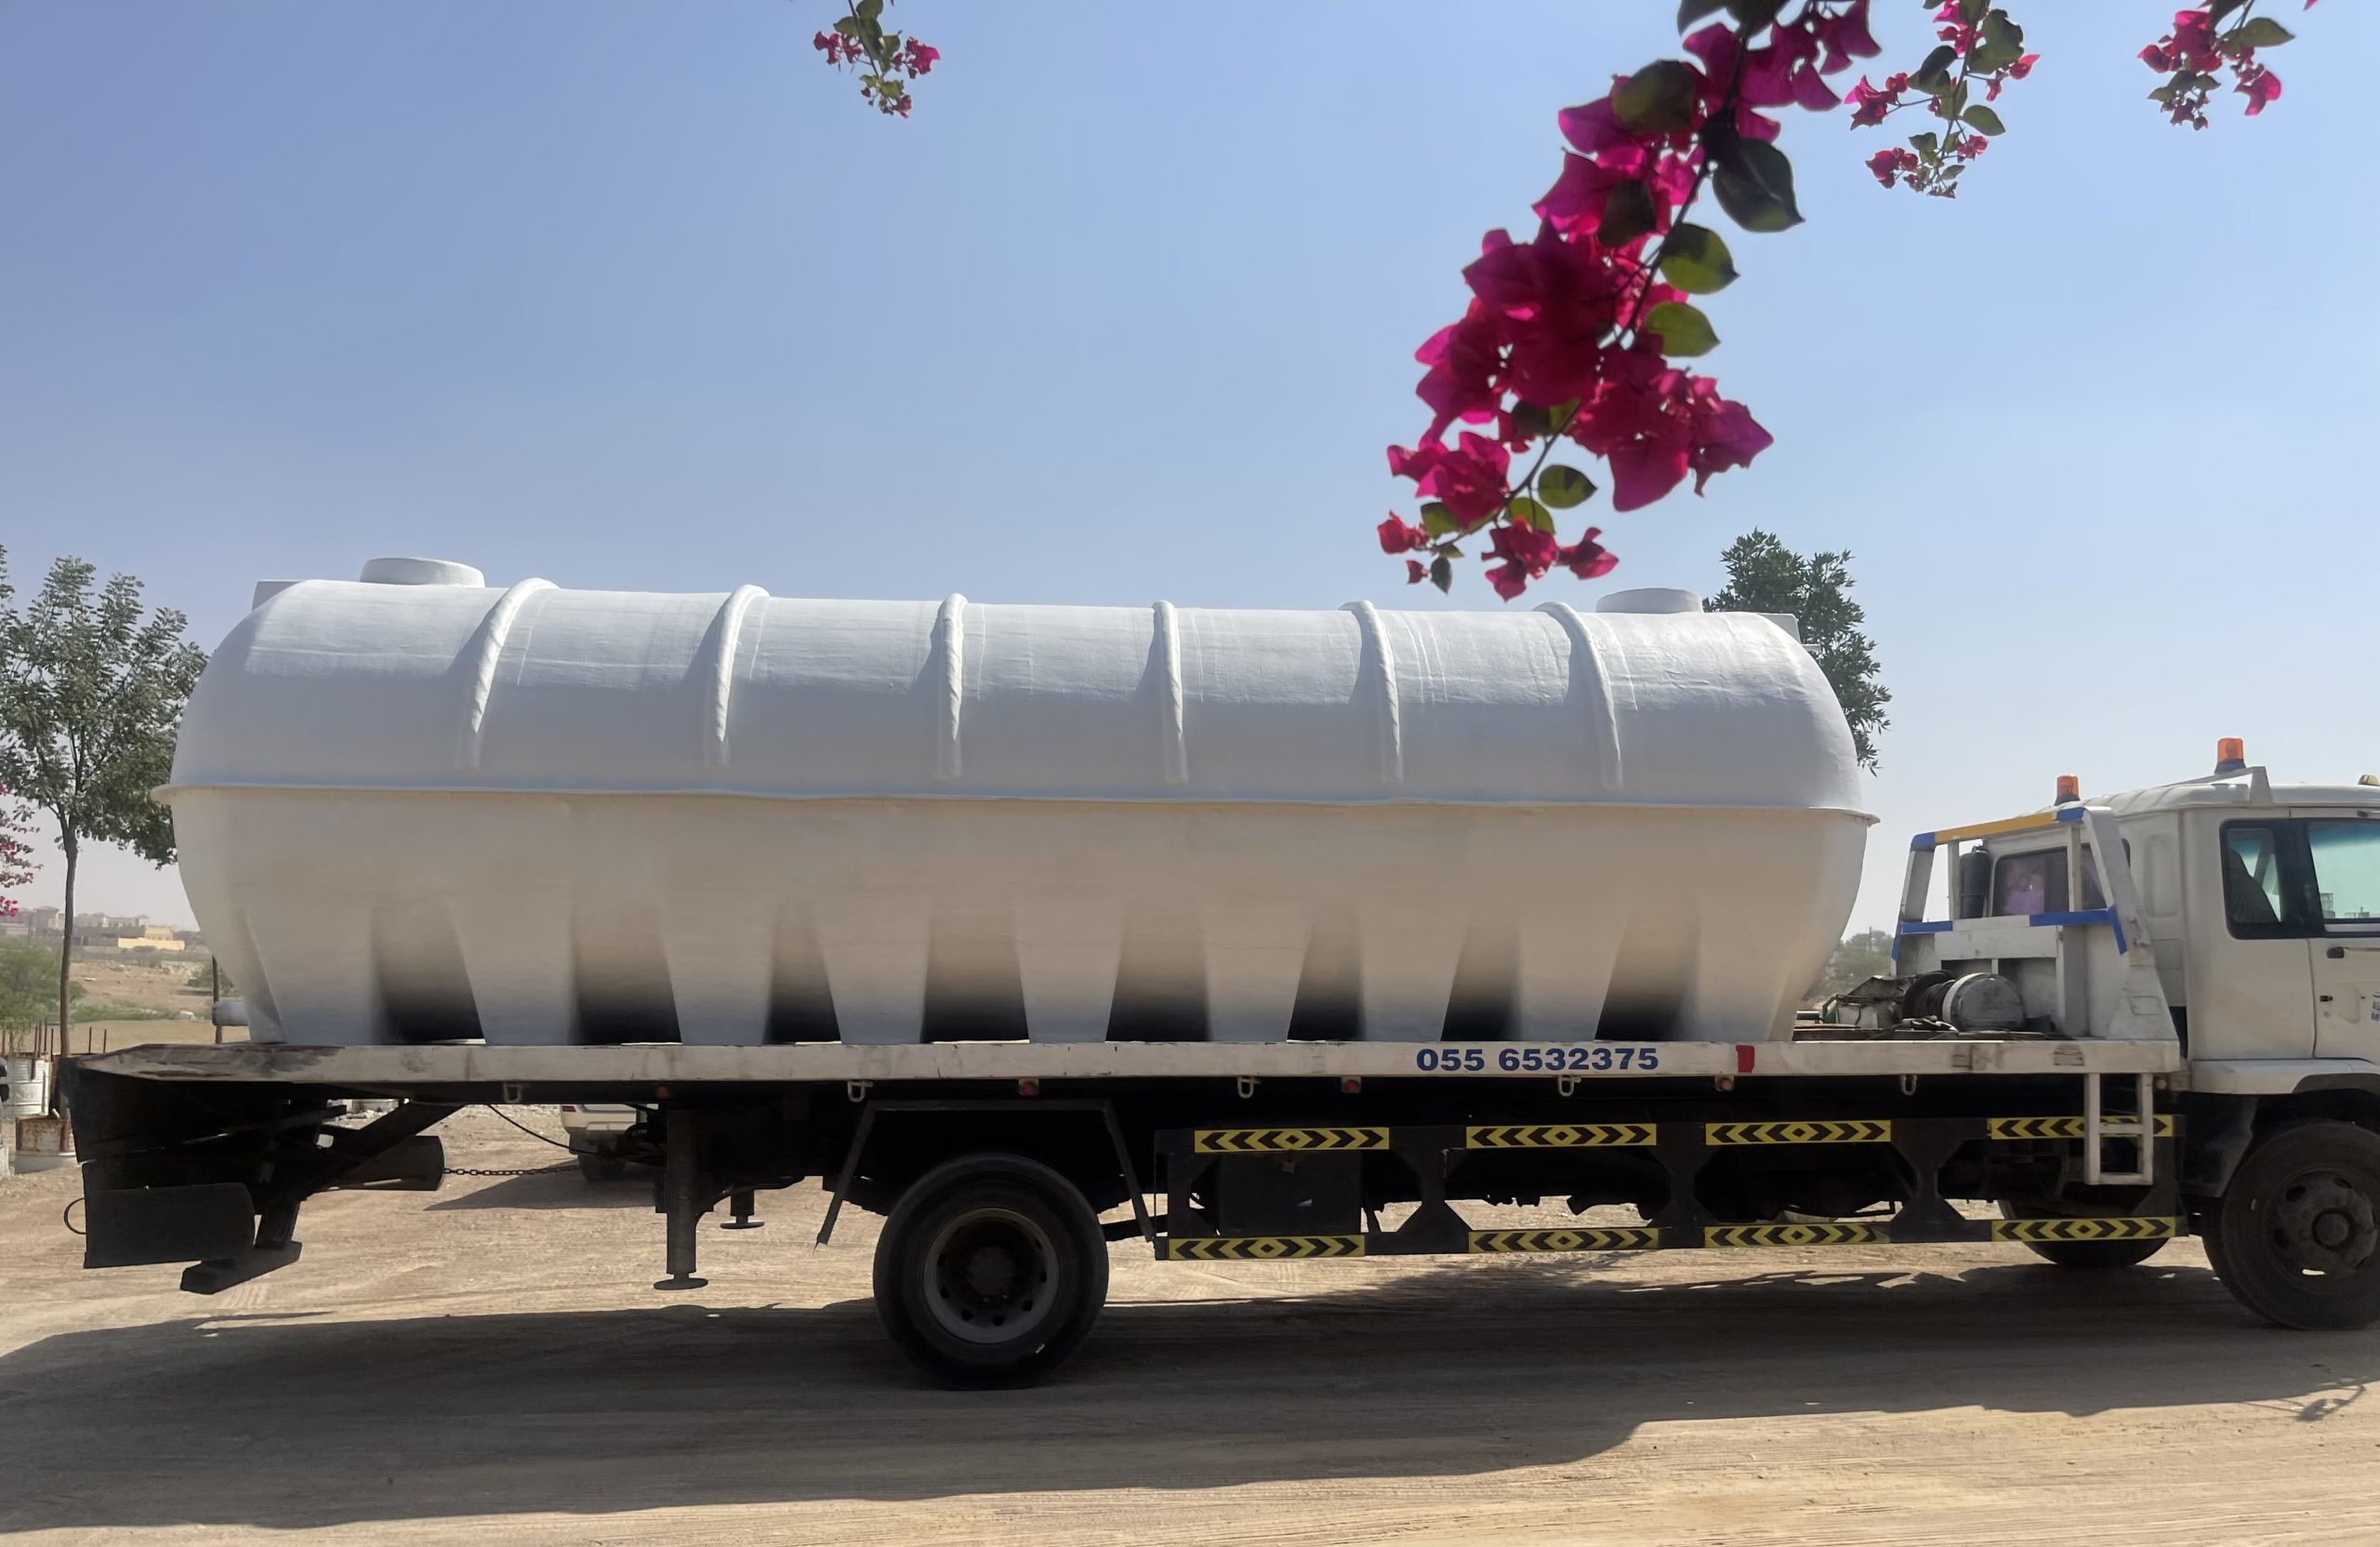 grp-tanks-manufacturer-and-distributor-in-UAE